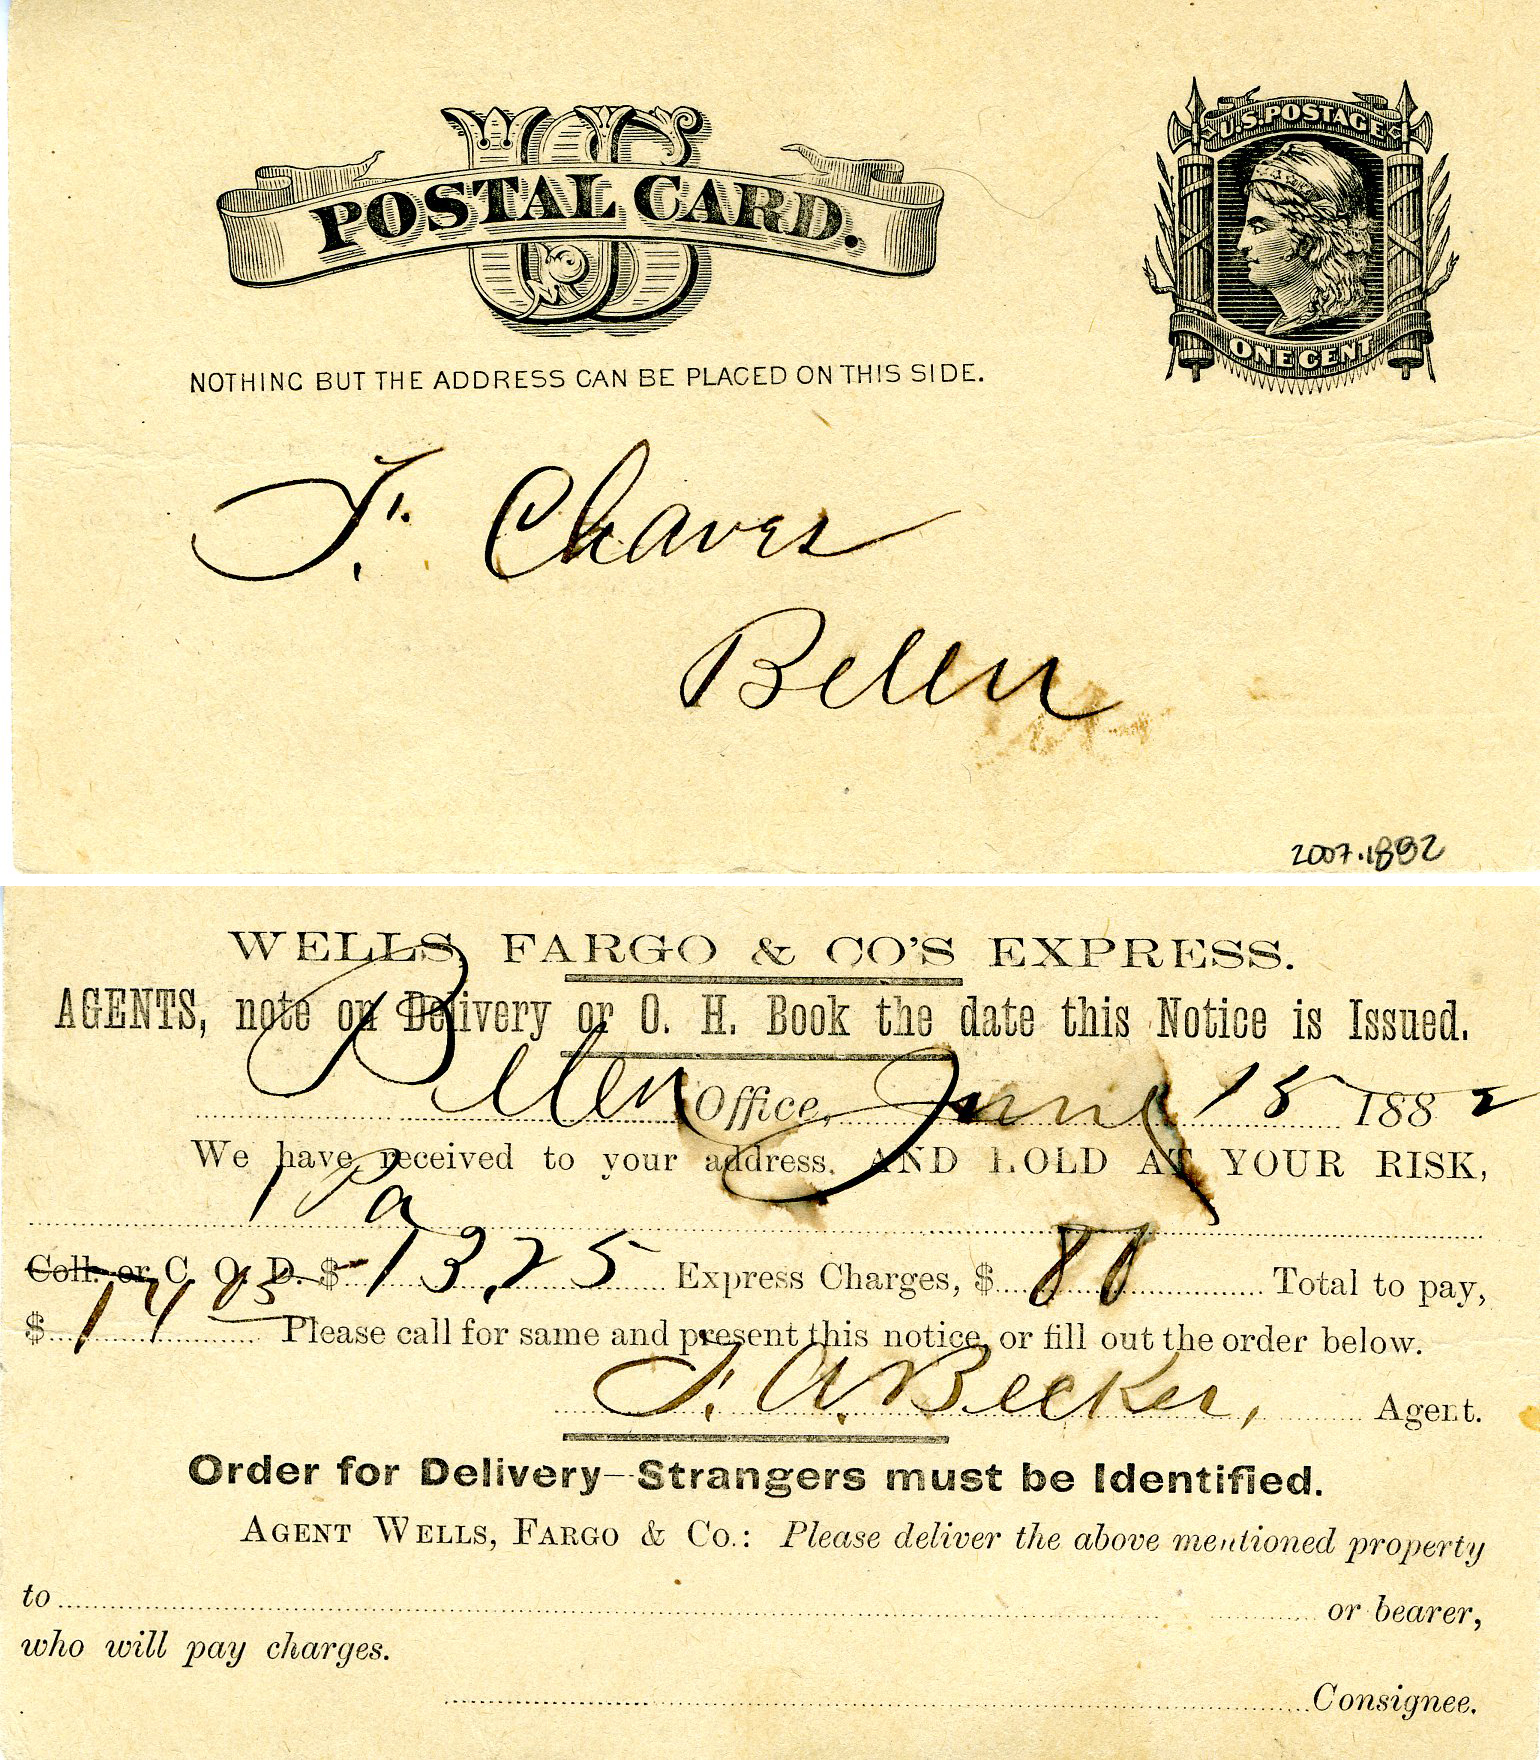 An aged postal card shows on one side it is to J. Chaves in Belen. The other side shows a date of June 1882, the charges, and agent’s signature. Image link will enlarge image.